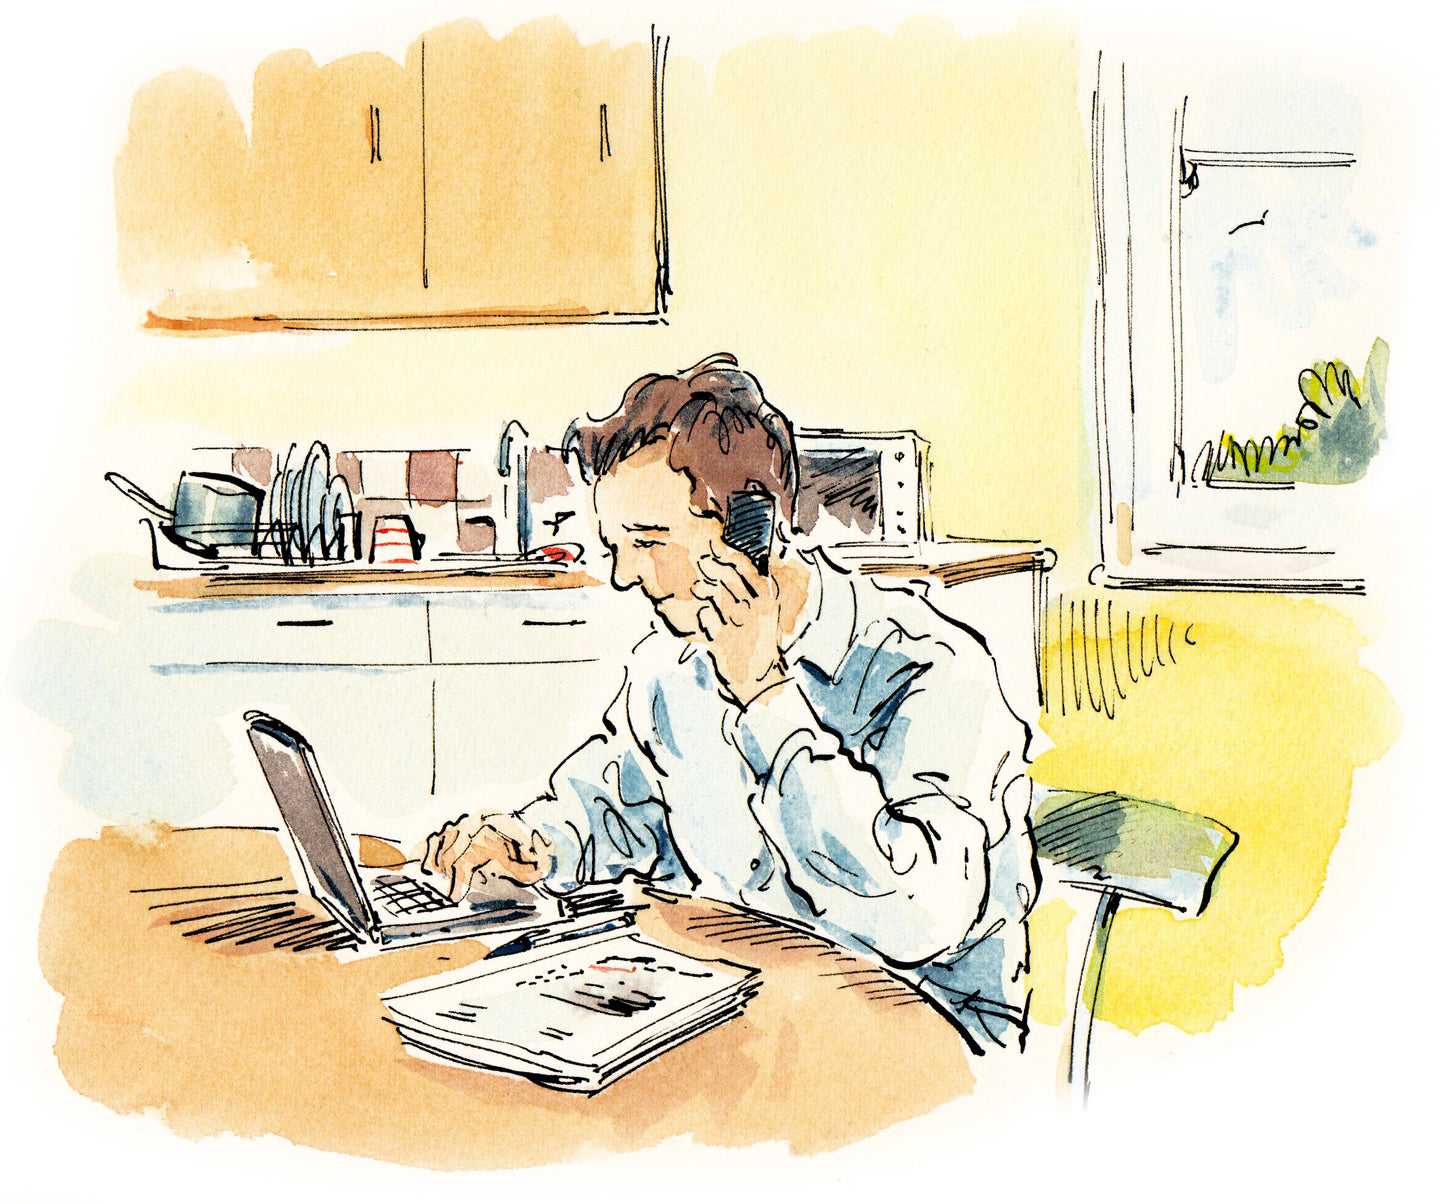 Image 77: Working From Home